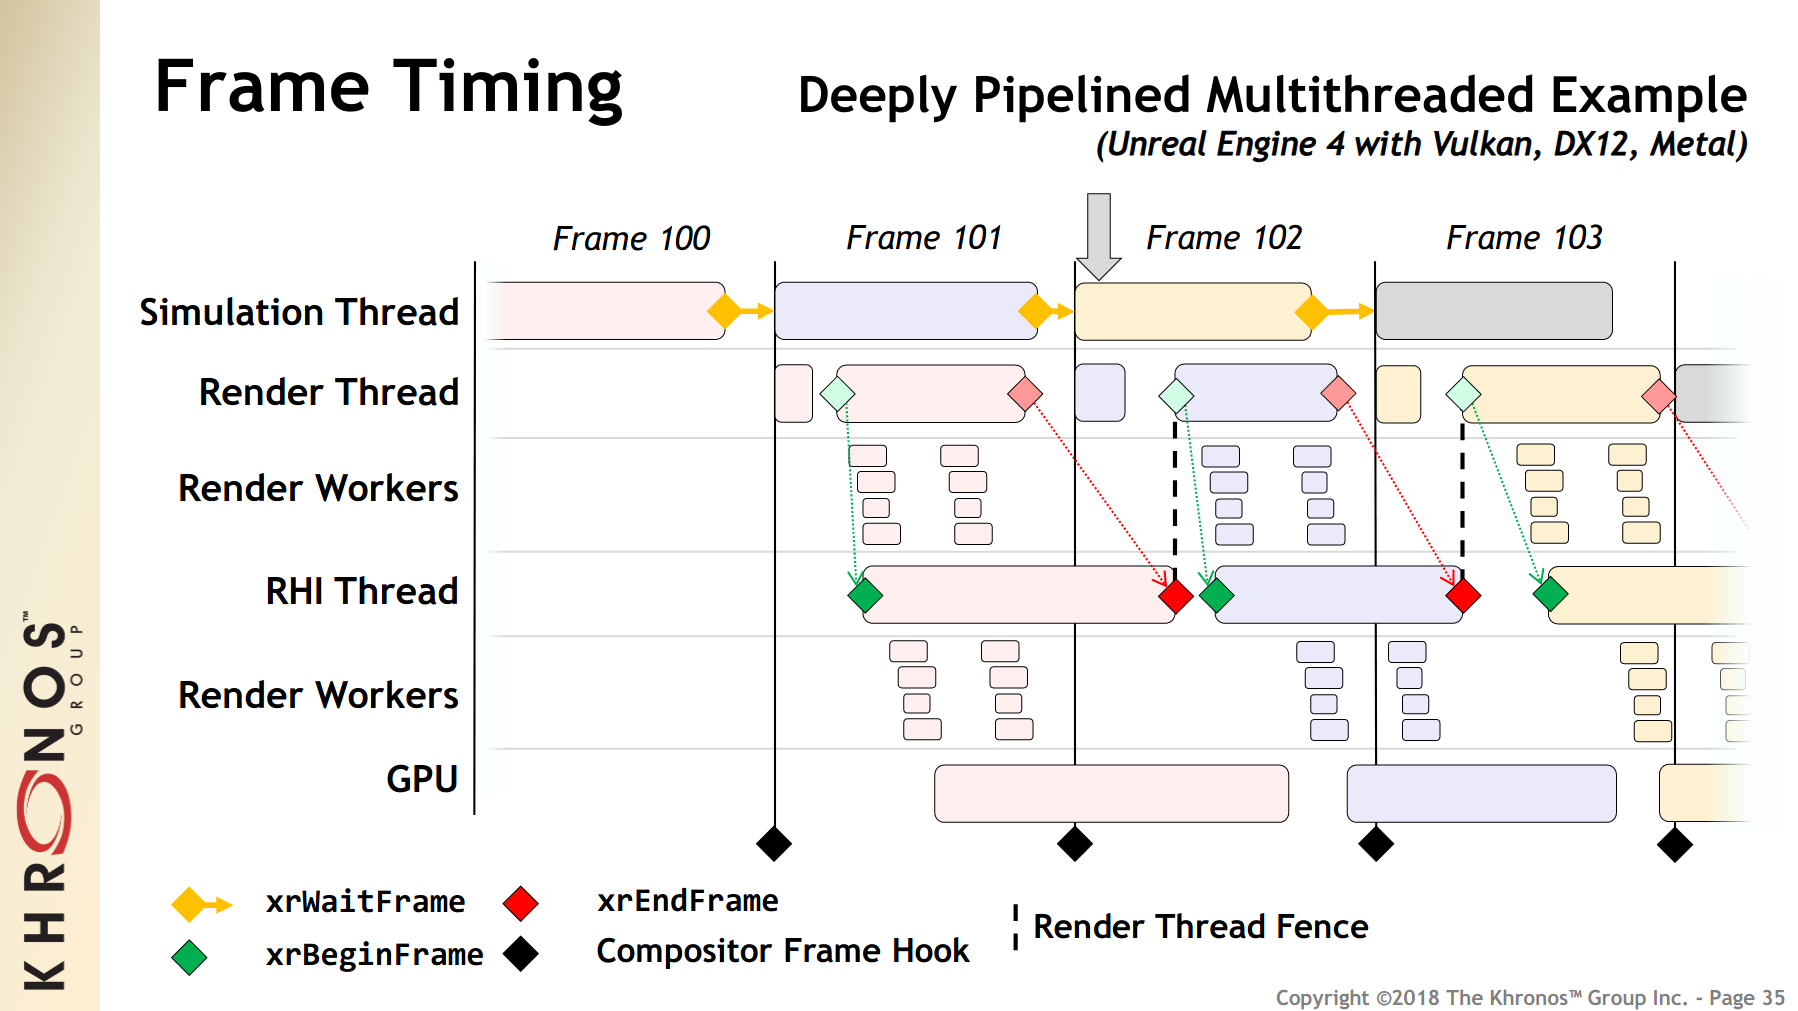 Deeply Pipelined Multithreaded Example (Unreal Engine 4)